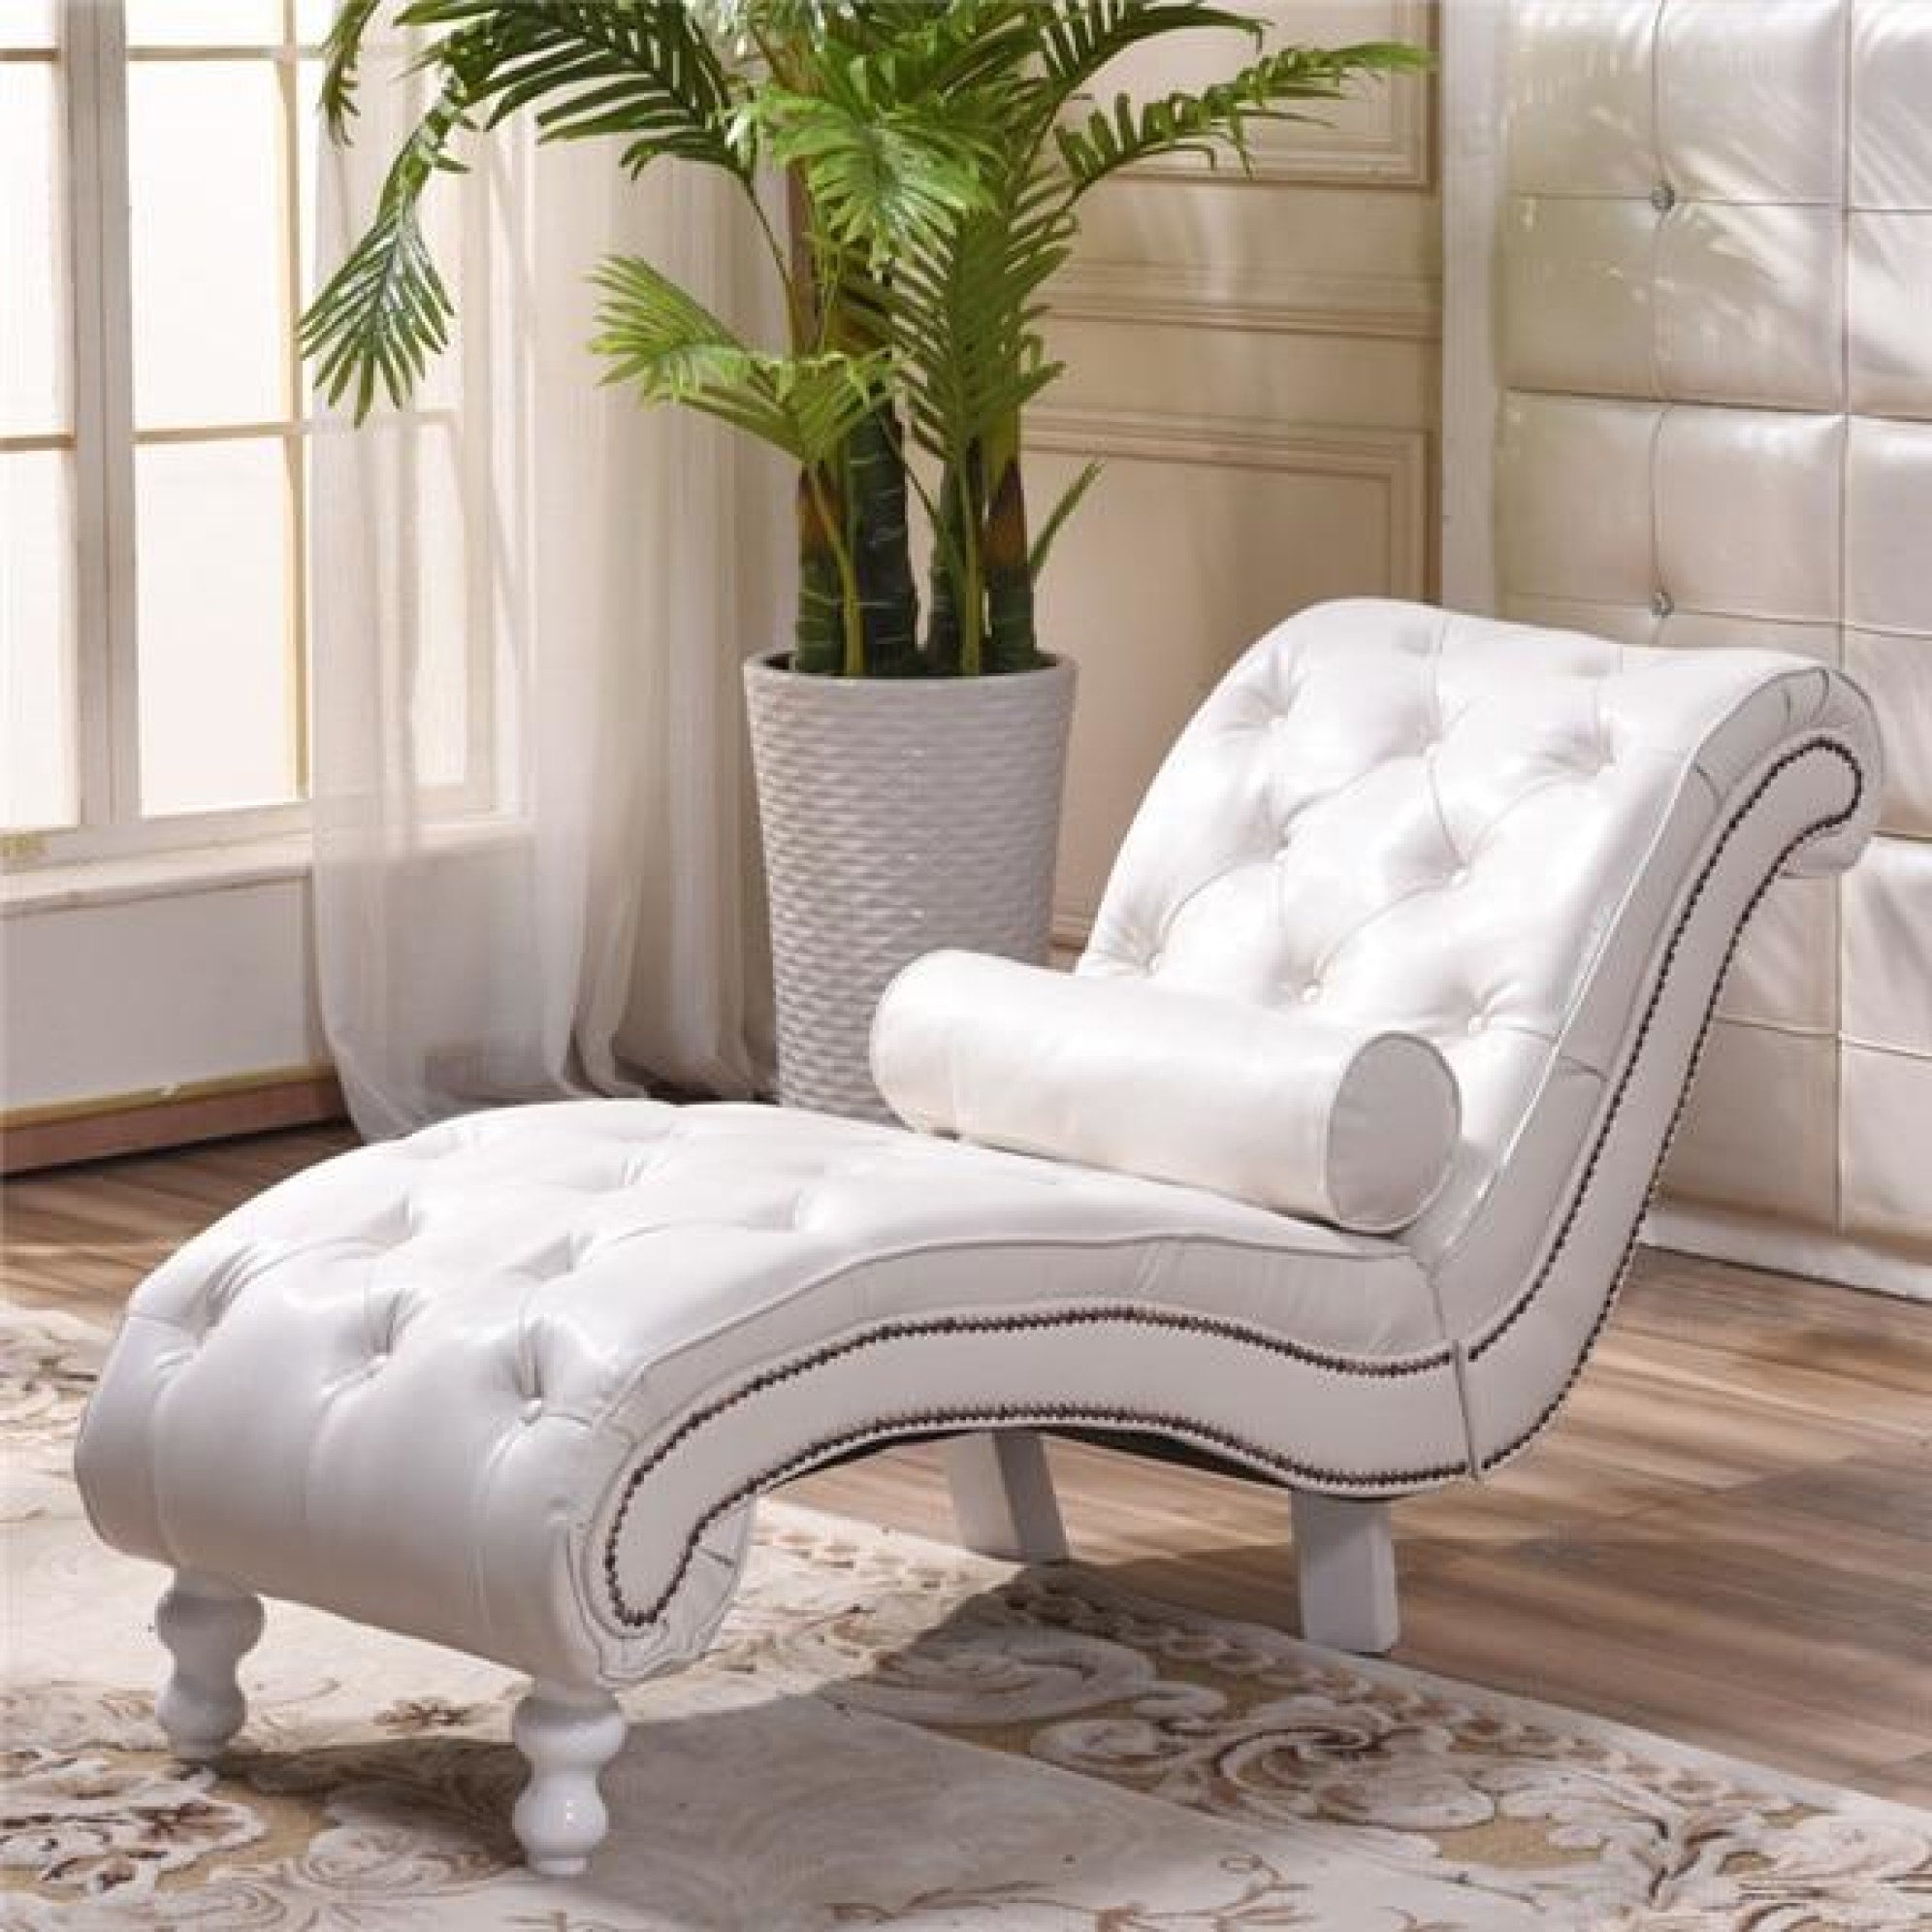 Premium Patio Tufted Chaise Lounge Daybed Chair My Aashis